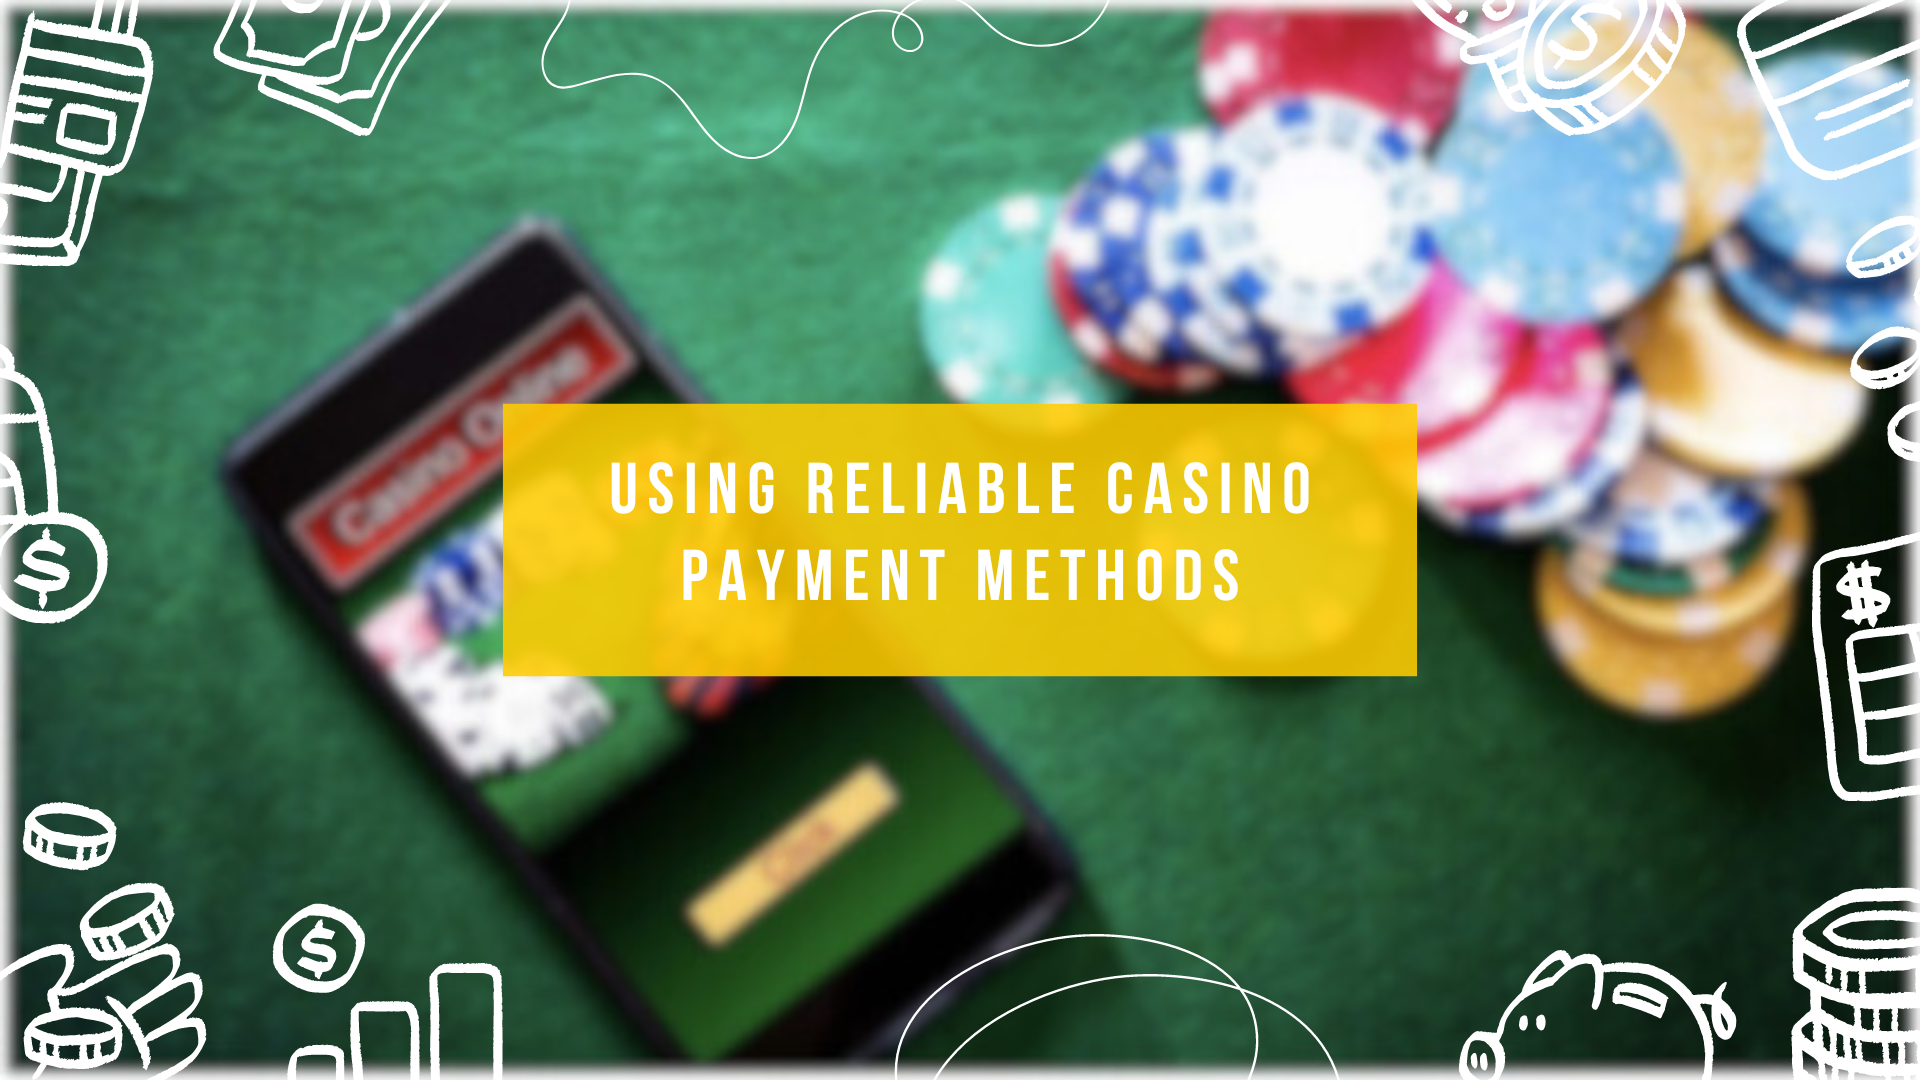 Using Reliable Casino Payment Methods